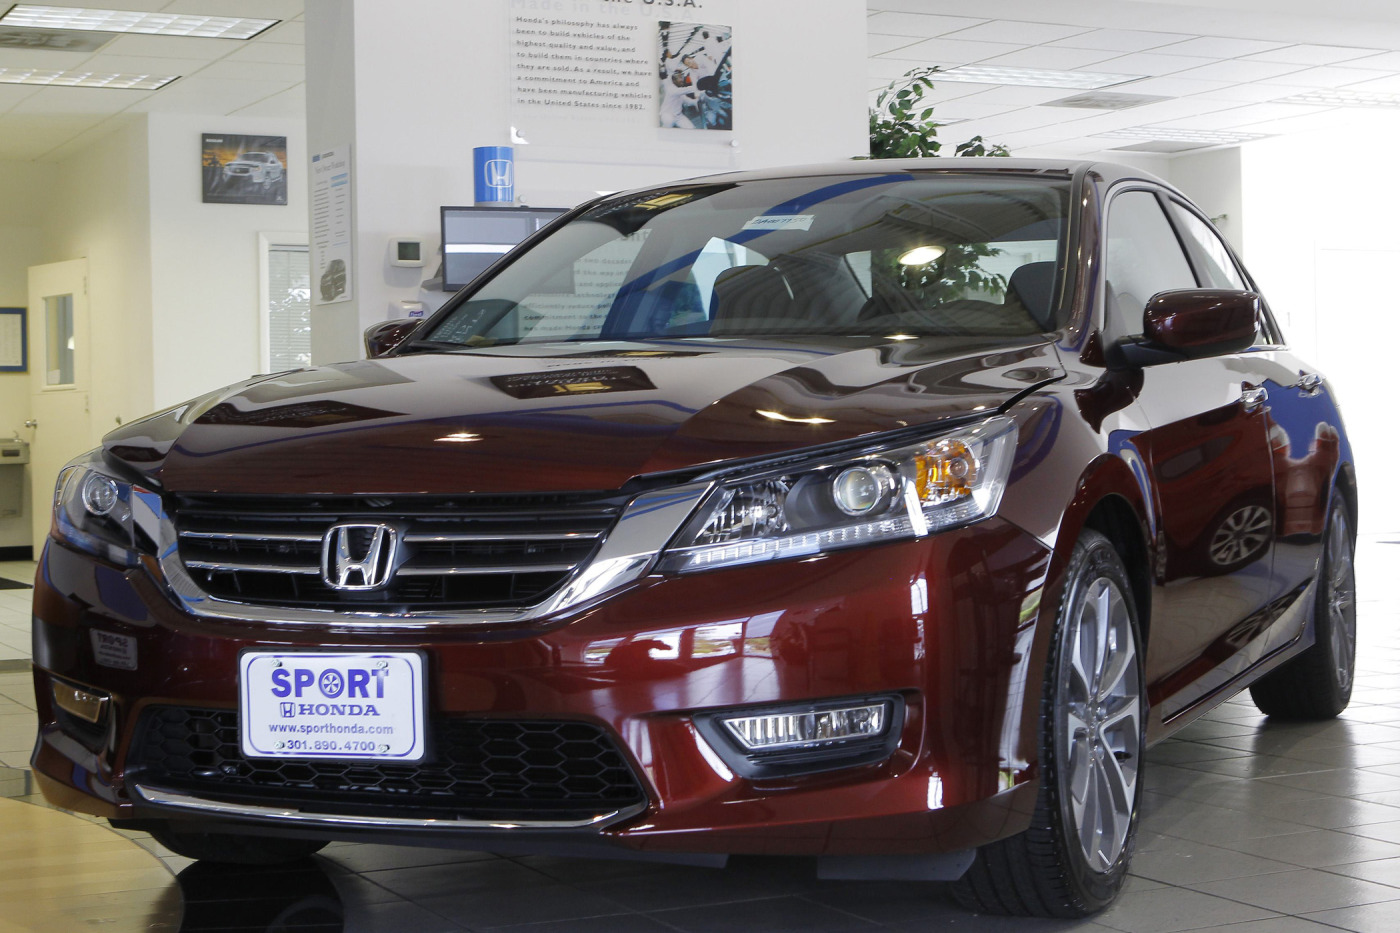 A new 2013 Honda Accord is shown on the sales floor at Sport Honda in Silver Spring, Maryland Sept. 17, 2012. (Gary Cameron&mdash;Reuters)